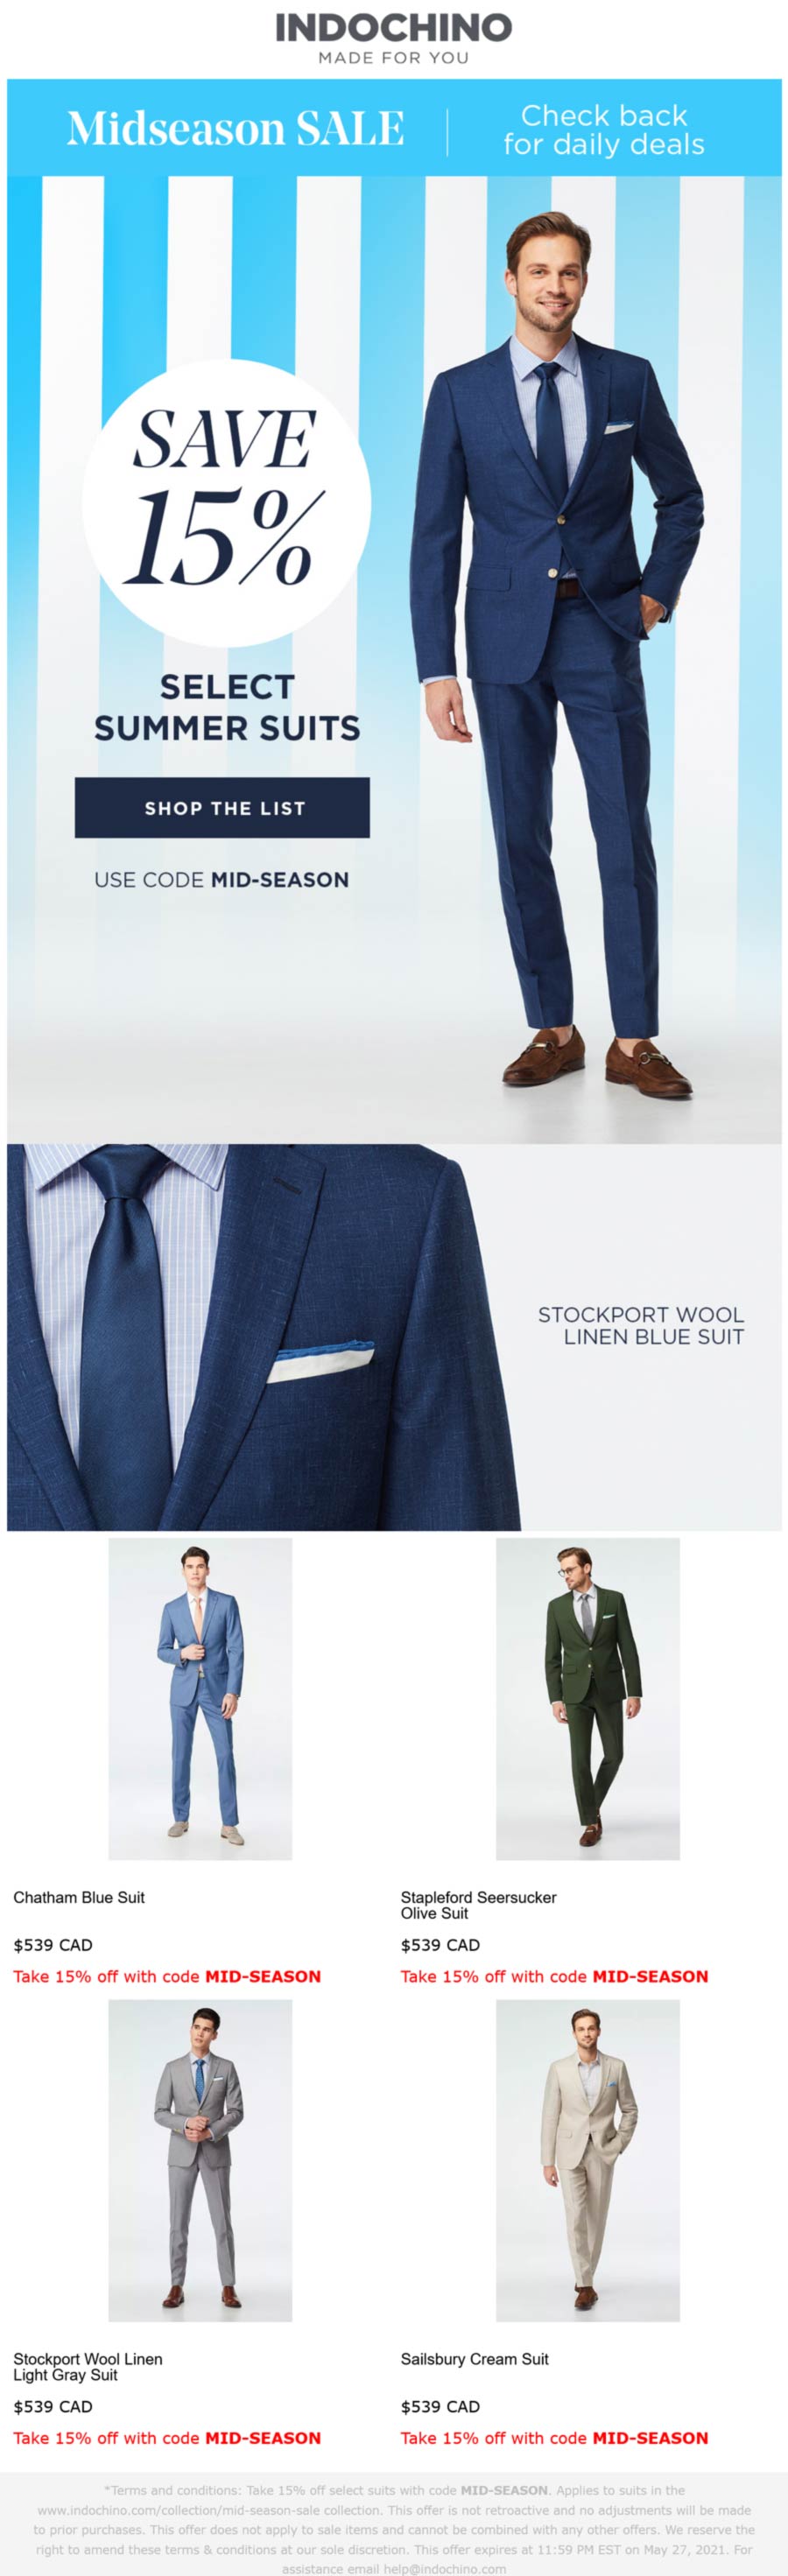 Indochino stores Coupon  15% off suits at Indochino via promo code MID-SEASON #indochino 